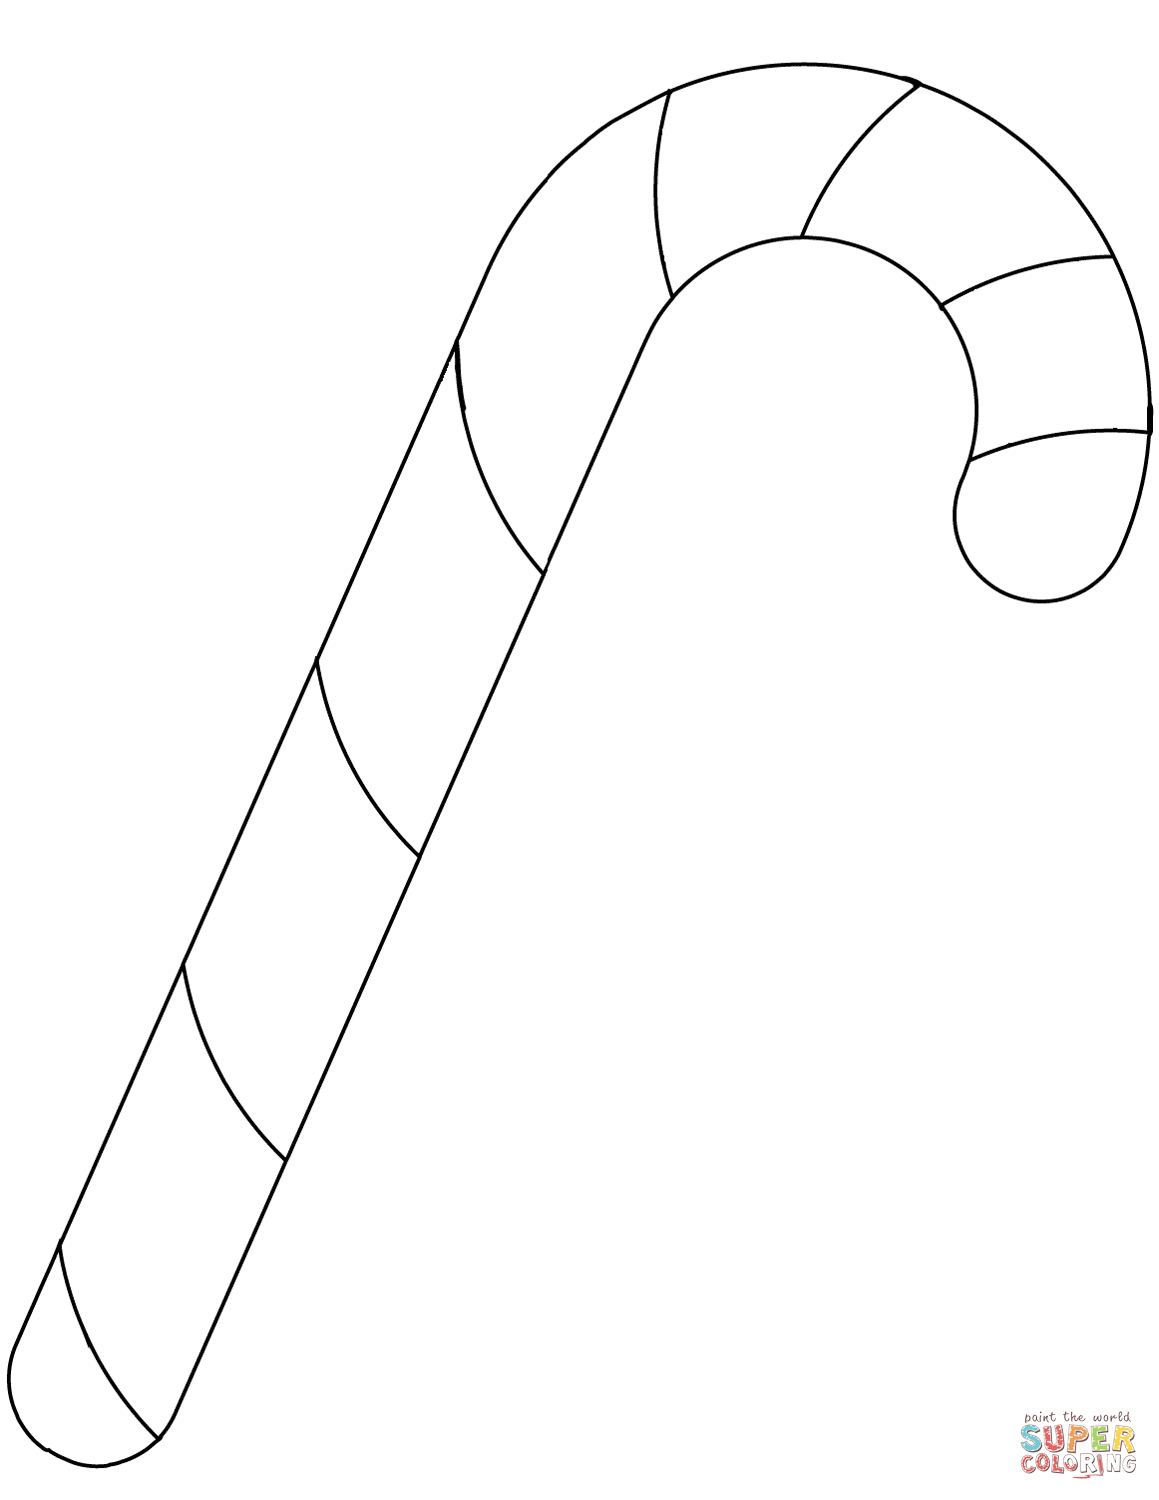 Candy Cane Coloring Page | Free Printable Coloring Pages - Free Printable Candy Cane